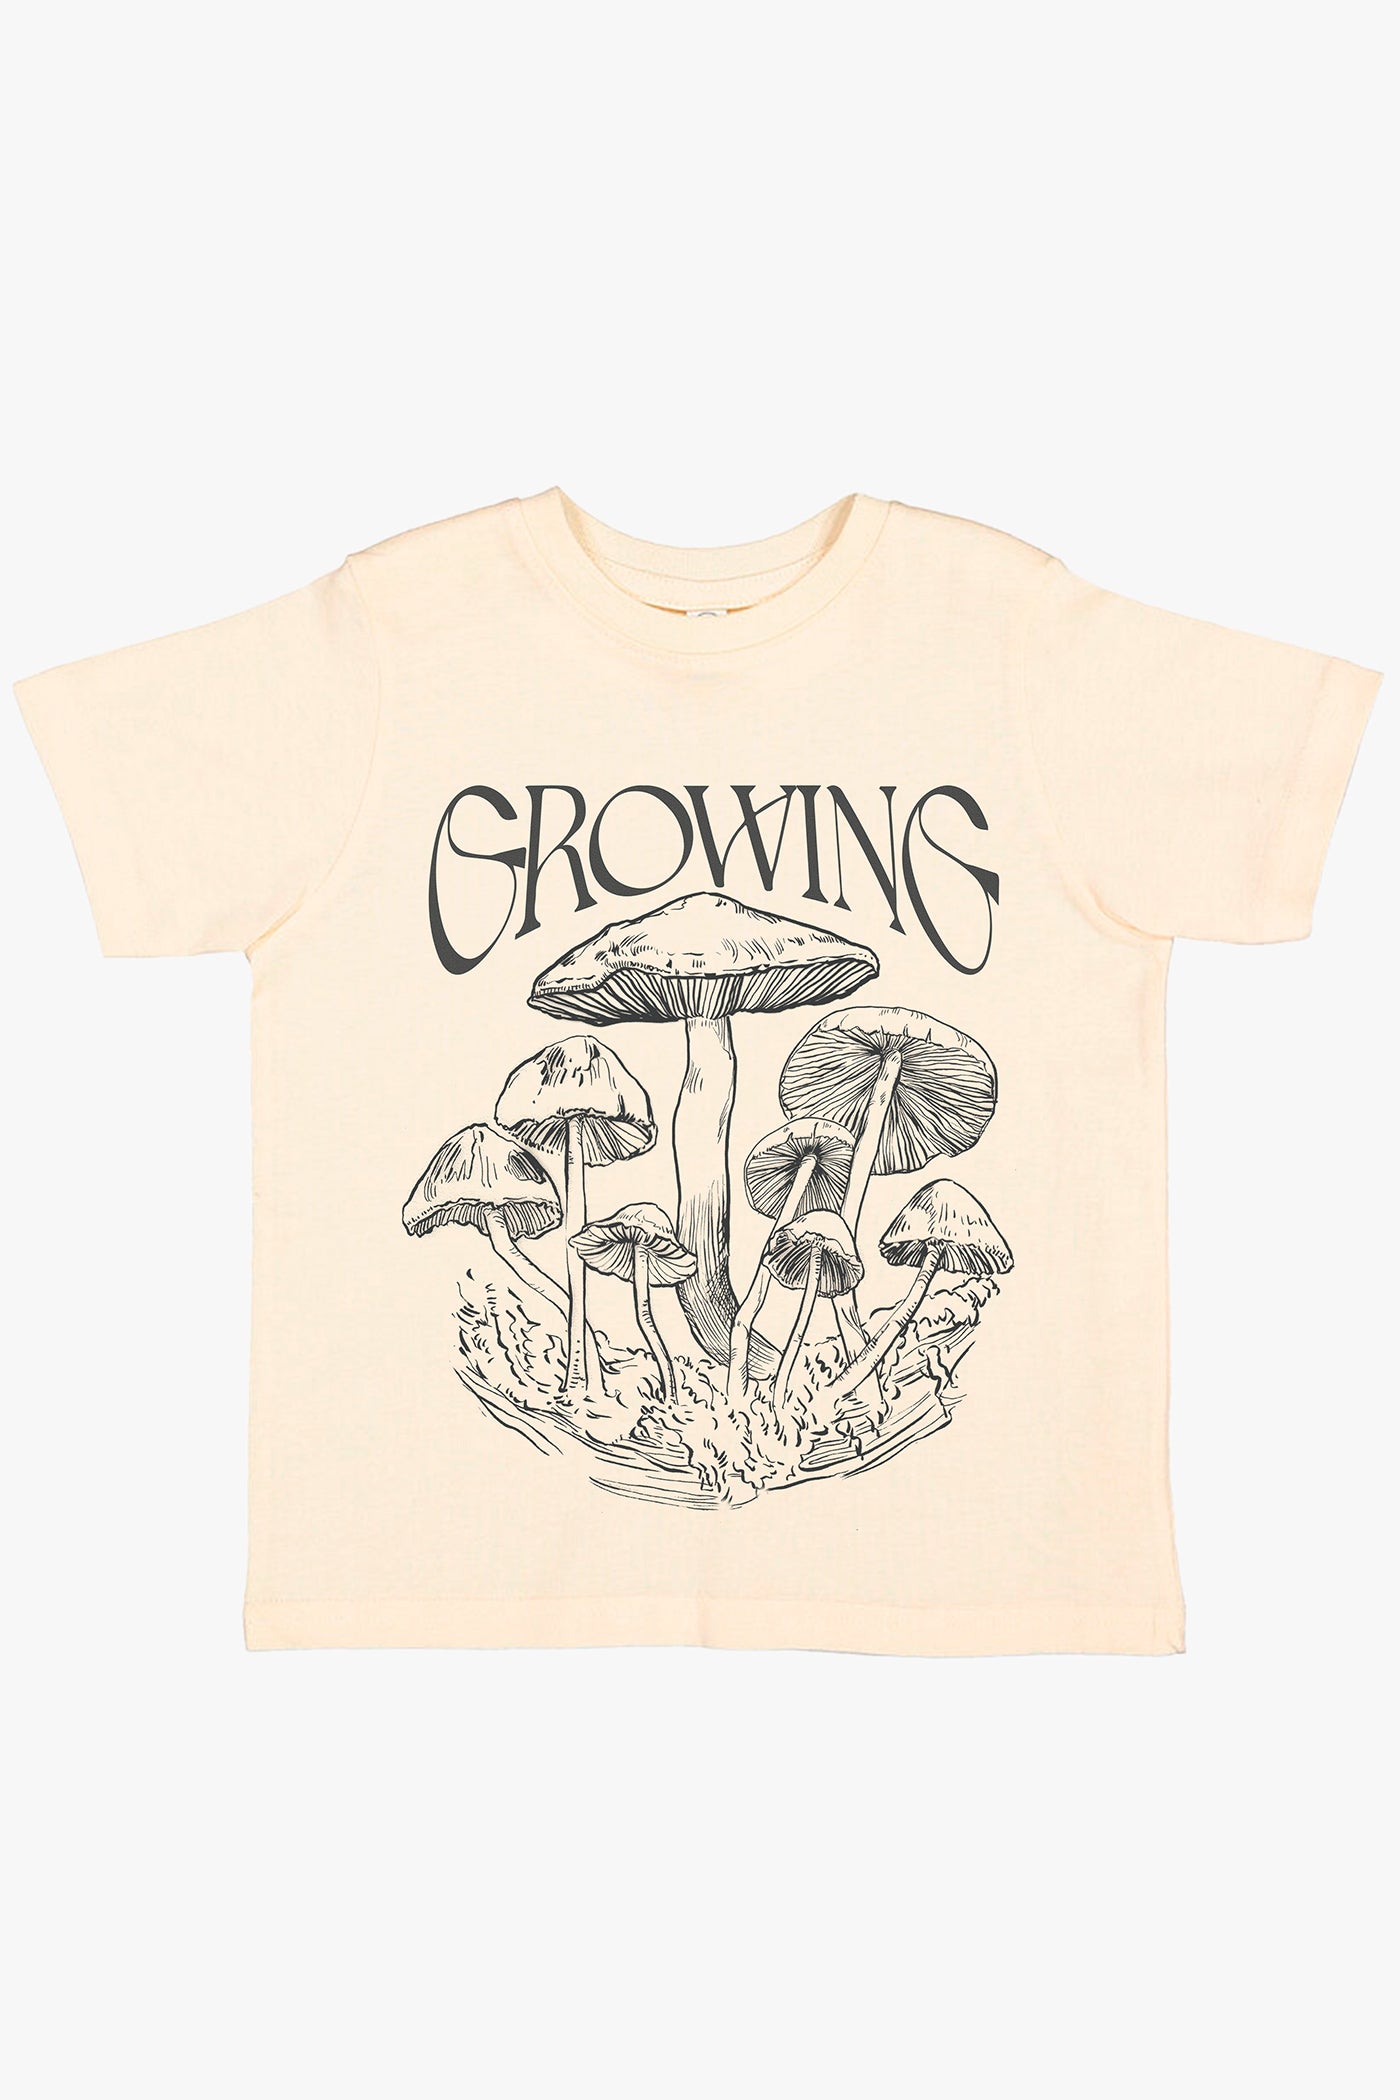 Growing Graphic Kids Tee by Nectar Kids